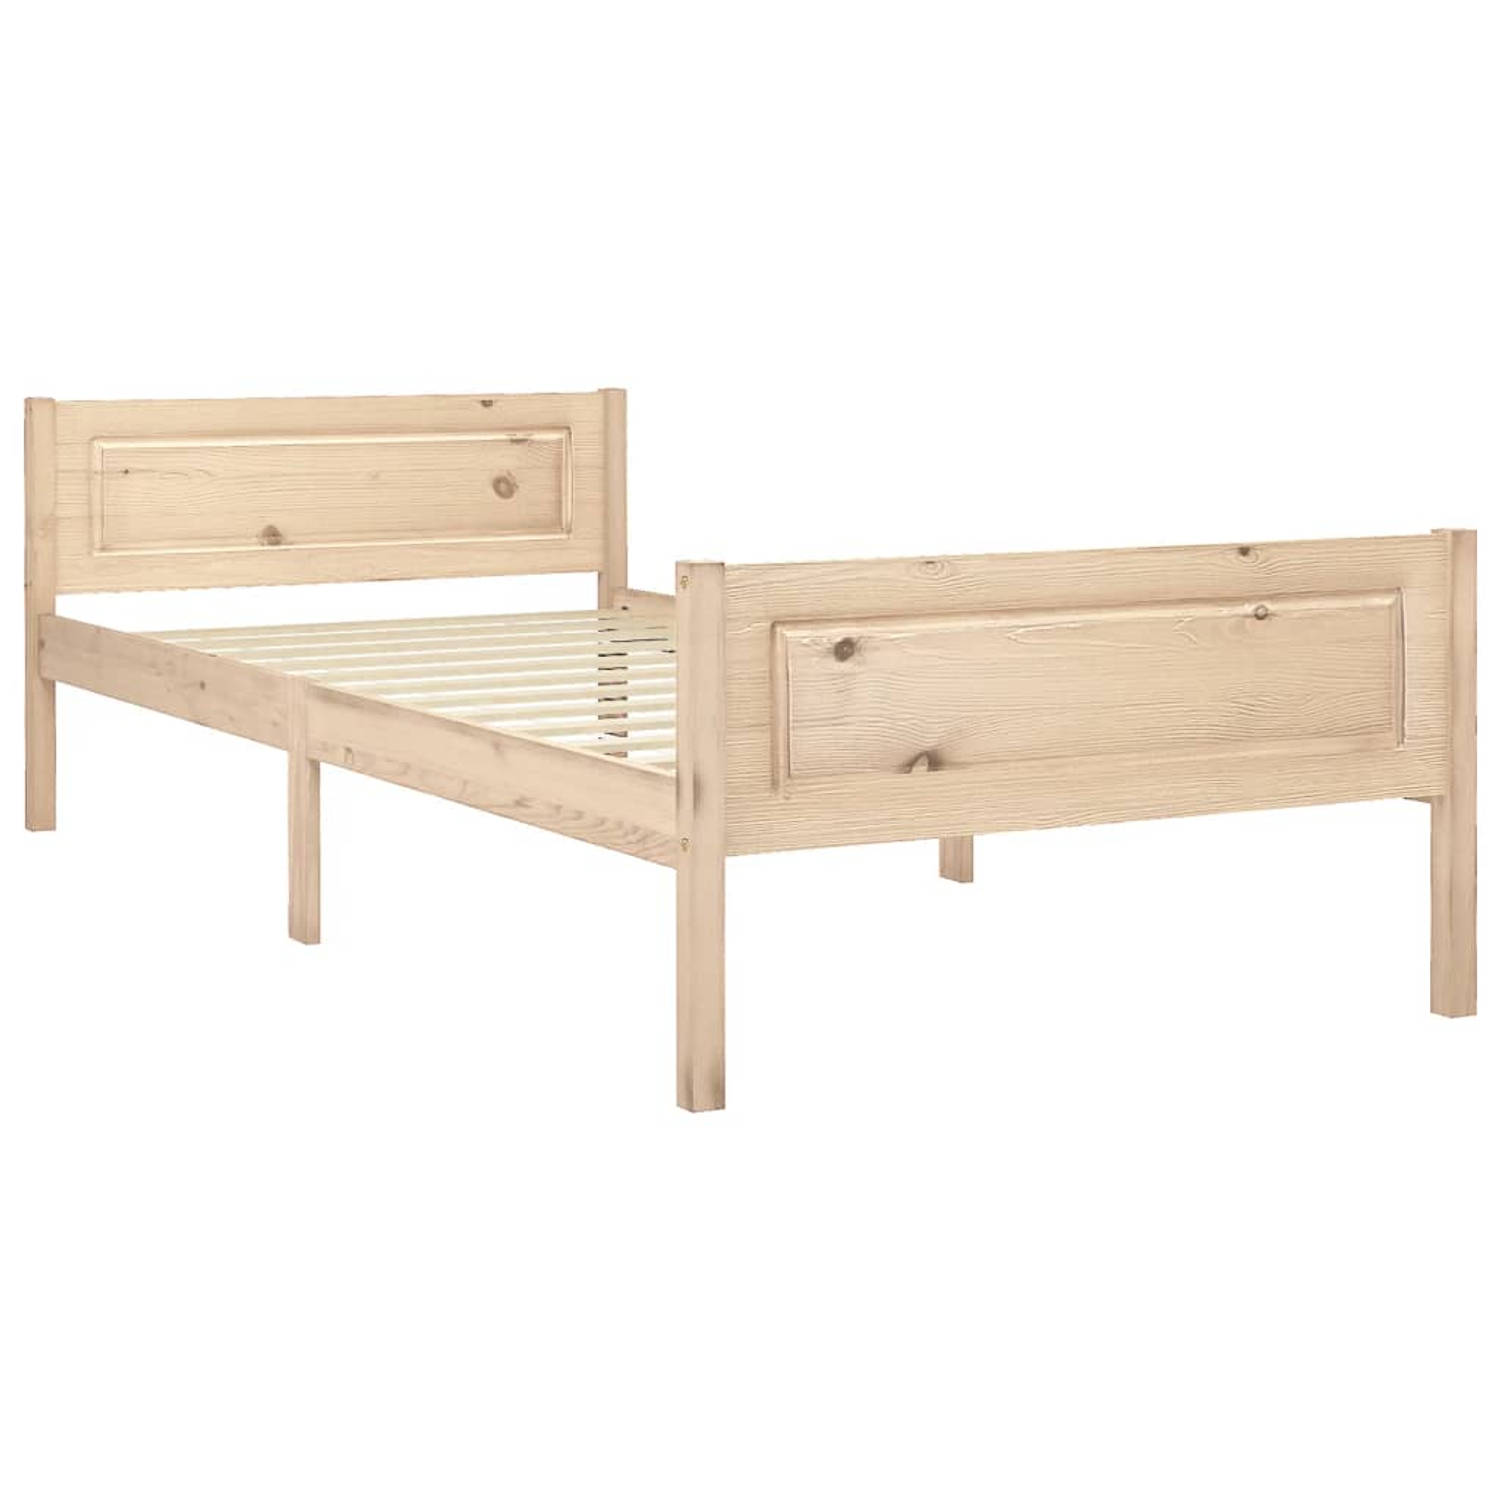 The Living Store Bedframe massief grenenhout 90x200 cm - Bedframe - Bedframe - Bed Frame - Bed Frames - Bed - Bedden - 1-persoonsbed - 1-persoonsbedden - Eenpersoons Bed